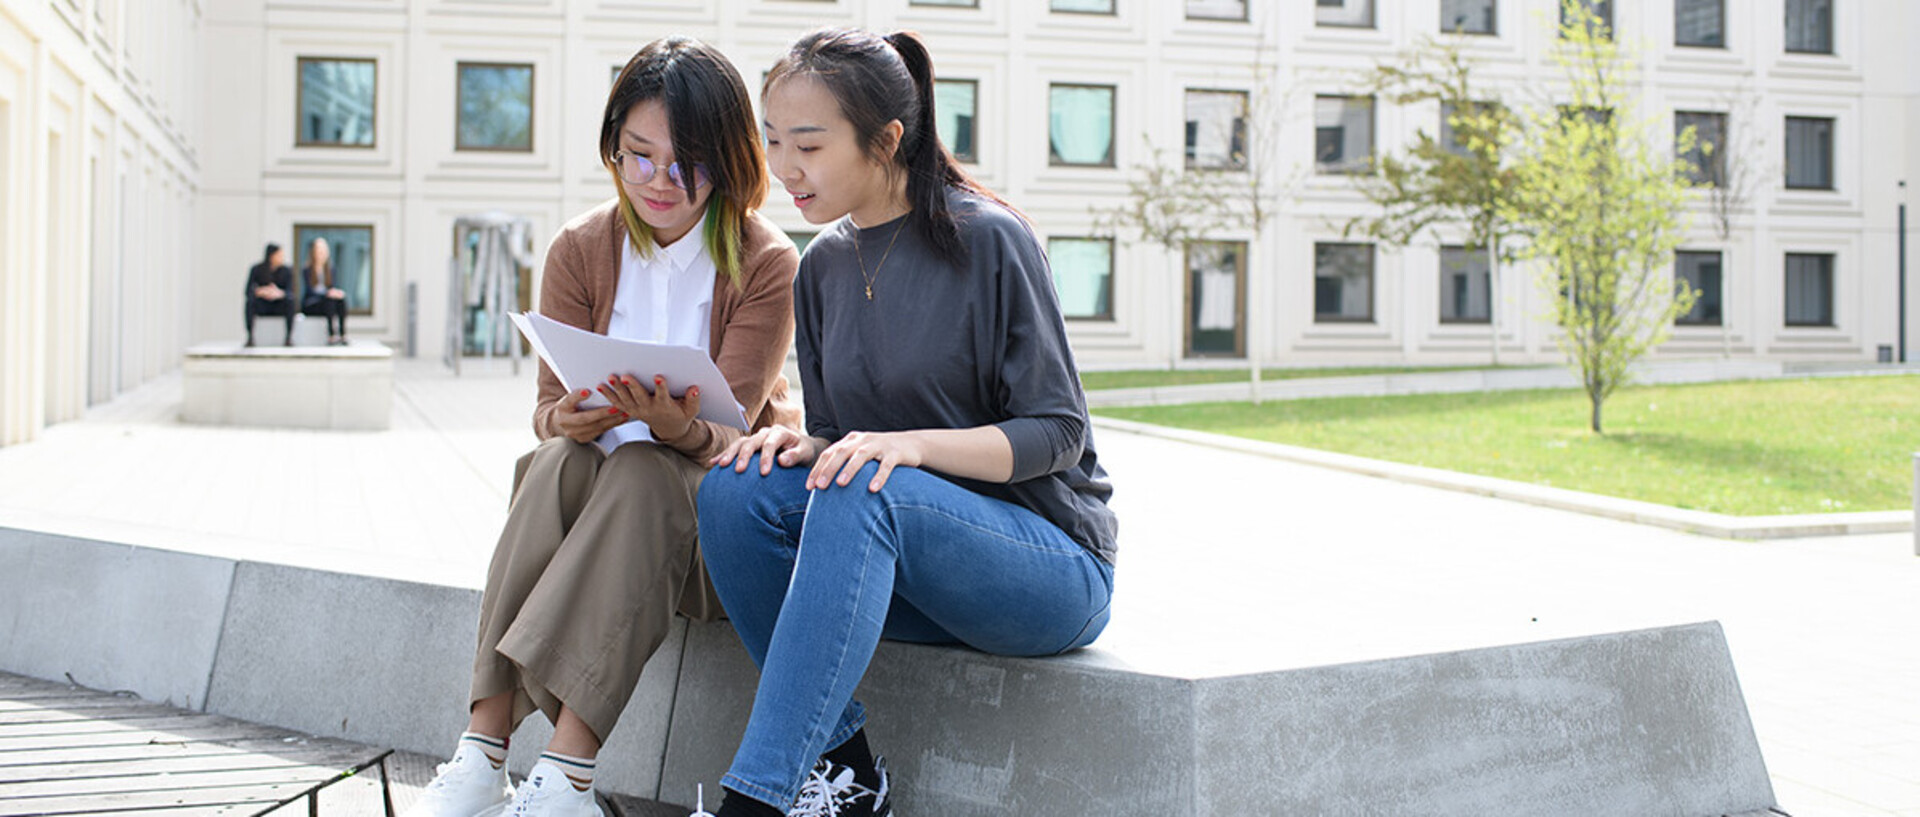 Two people reading in the yard of the university building B6